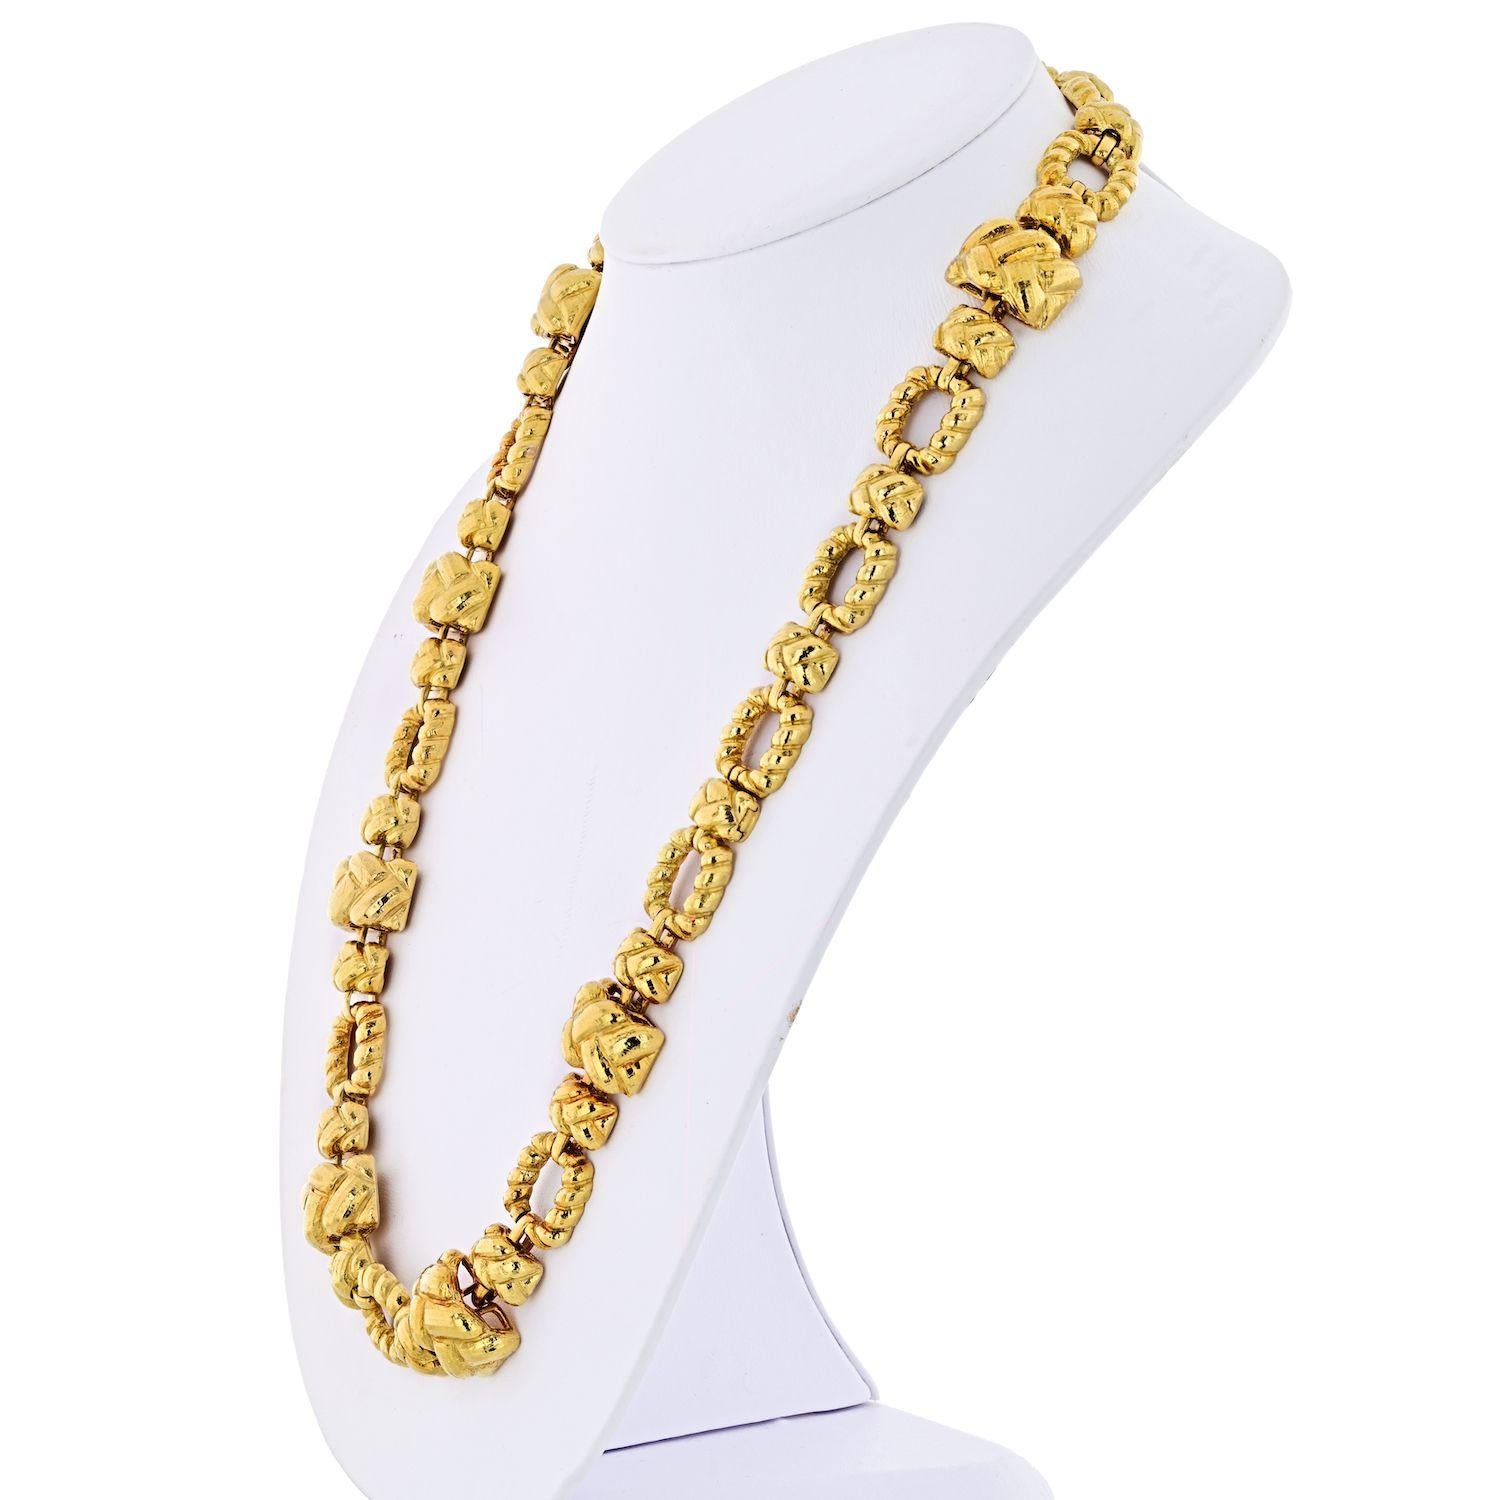 David Webb 1970's 18K Yellow Gold 28 inches Articulated Chunky Link Necklace. 
This necklace is not for fainthearted, of an impressive gold weight this is an articulated ropetwist link necklace by David Webb crafted in solid 18K Yellow Gold.